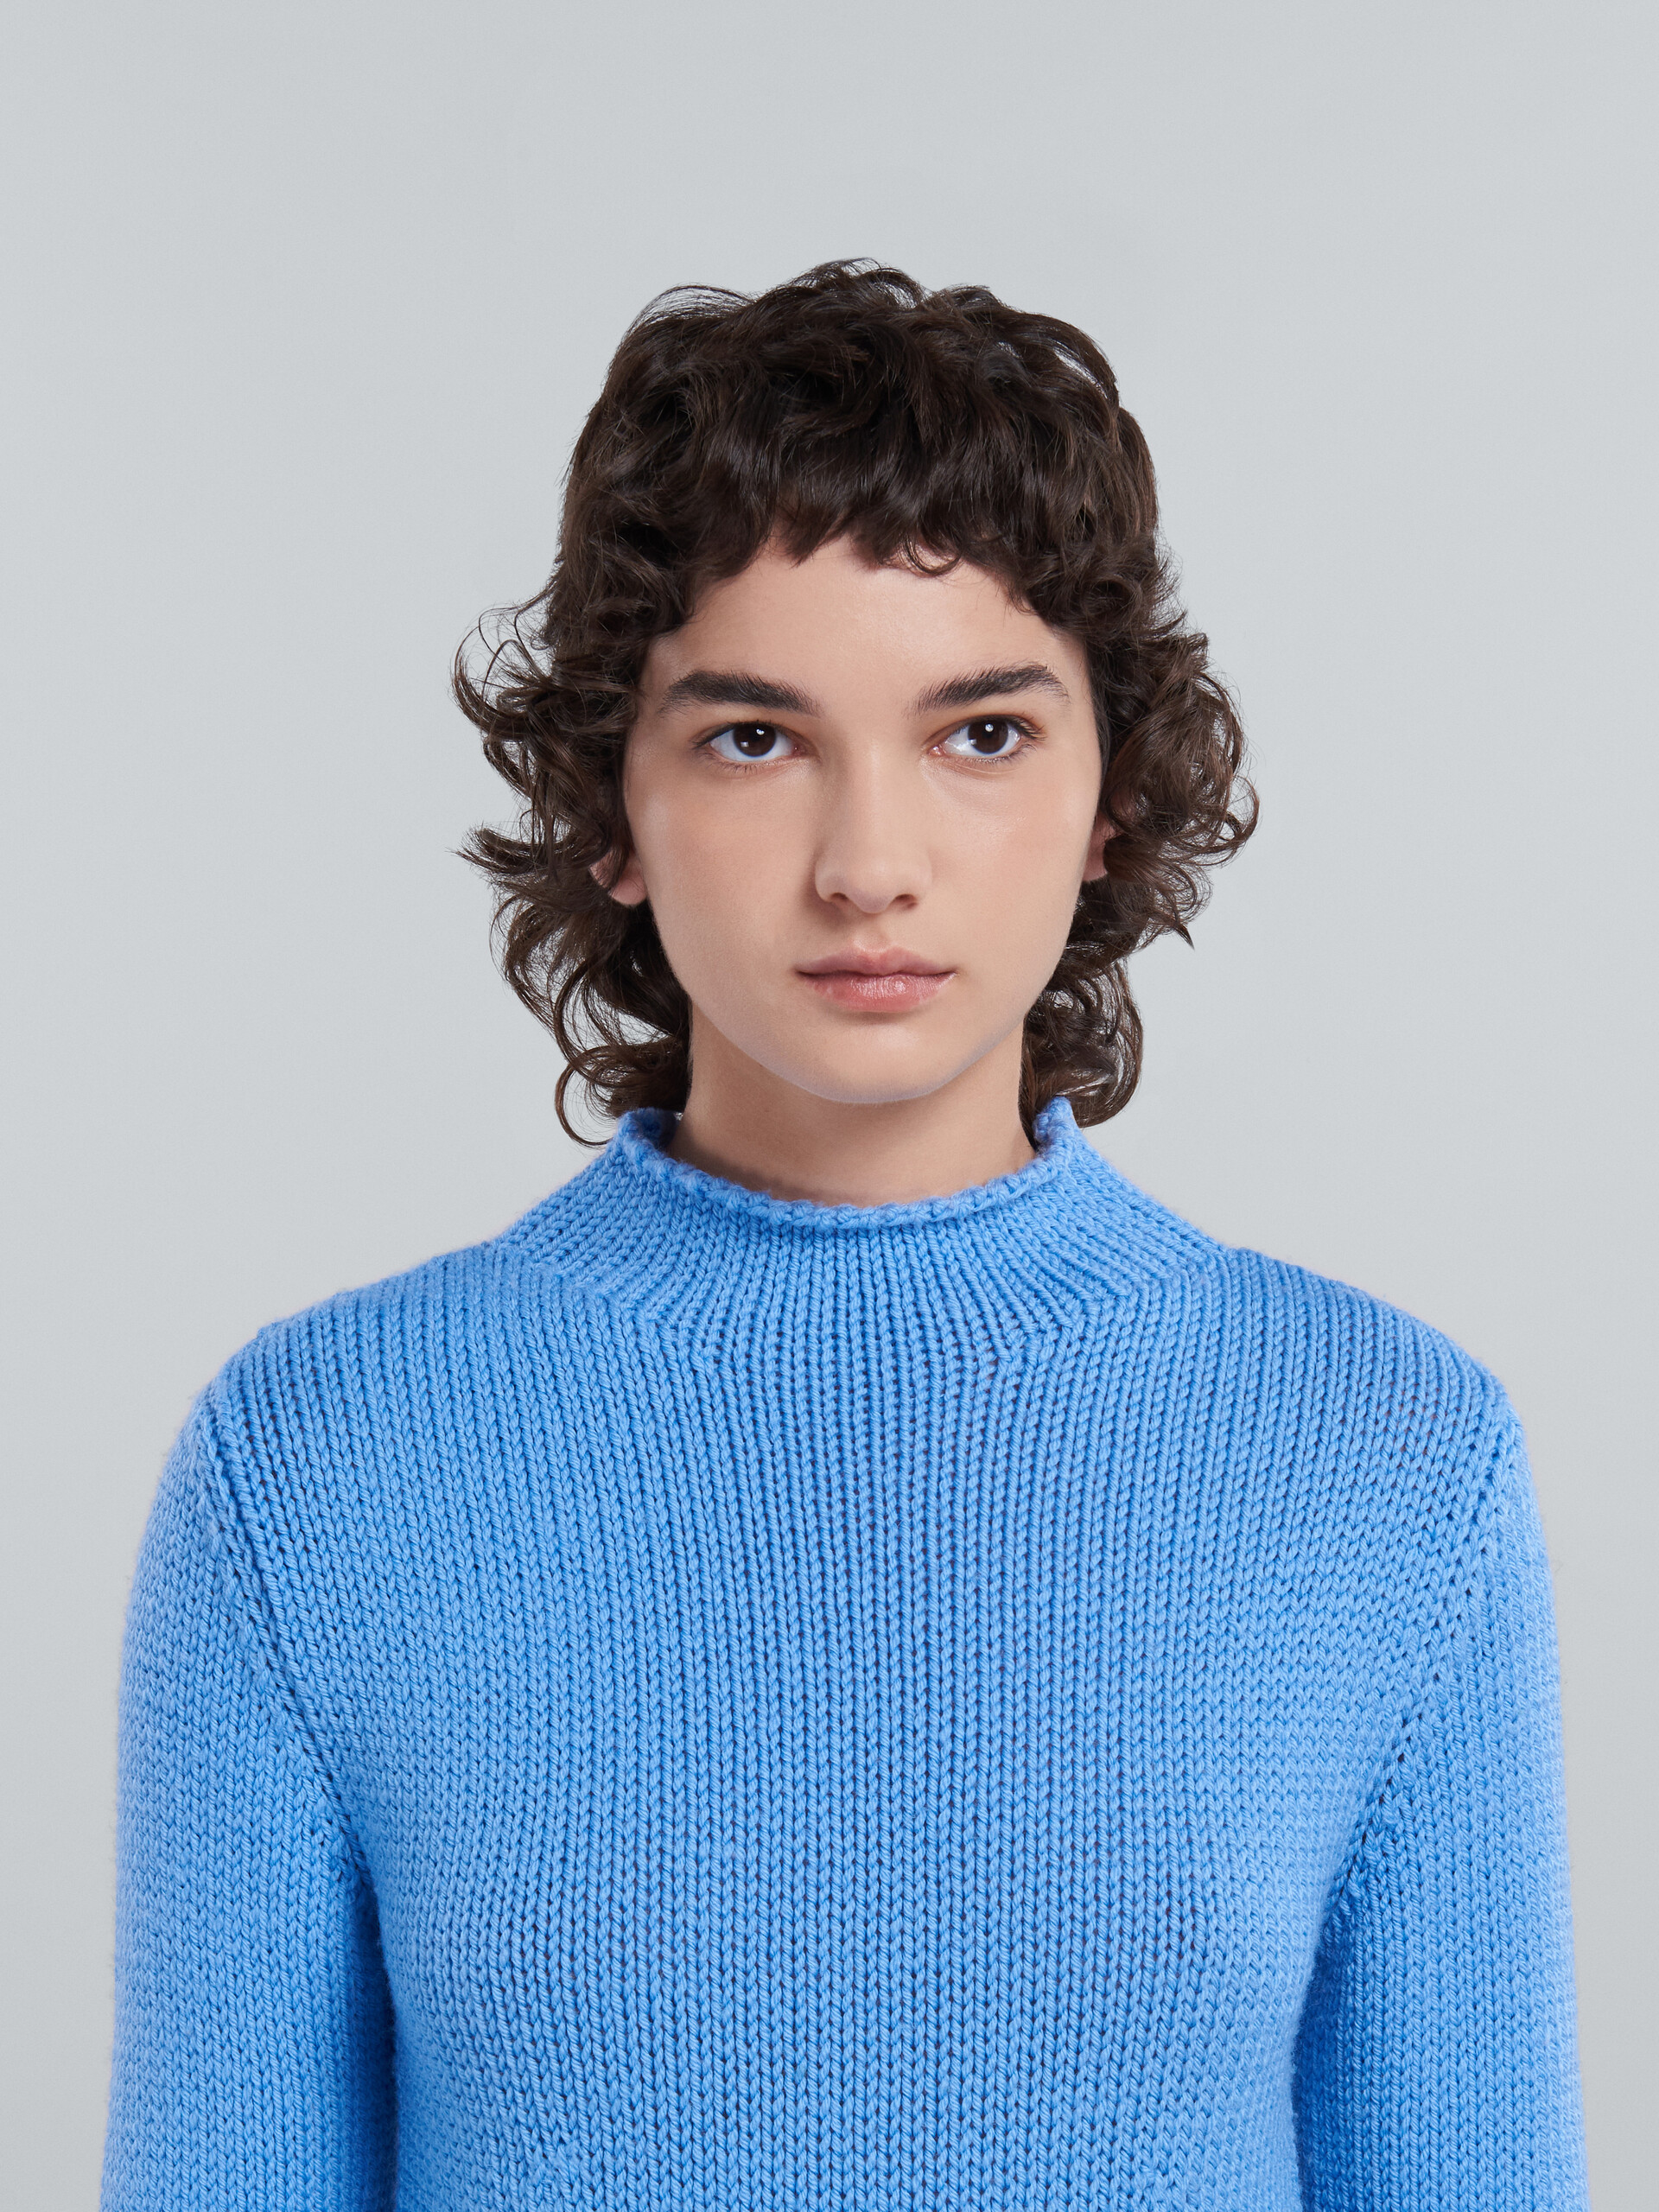 Light blue wool sweater with logo - Pullovers - Image 4